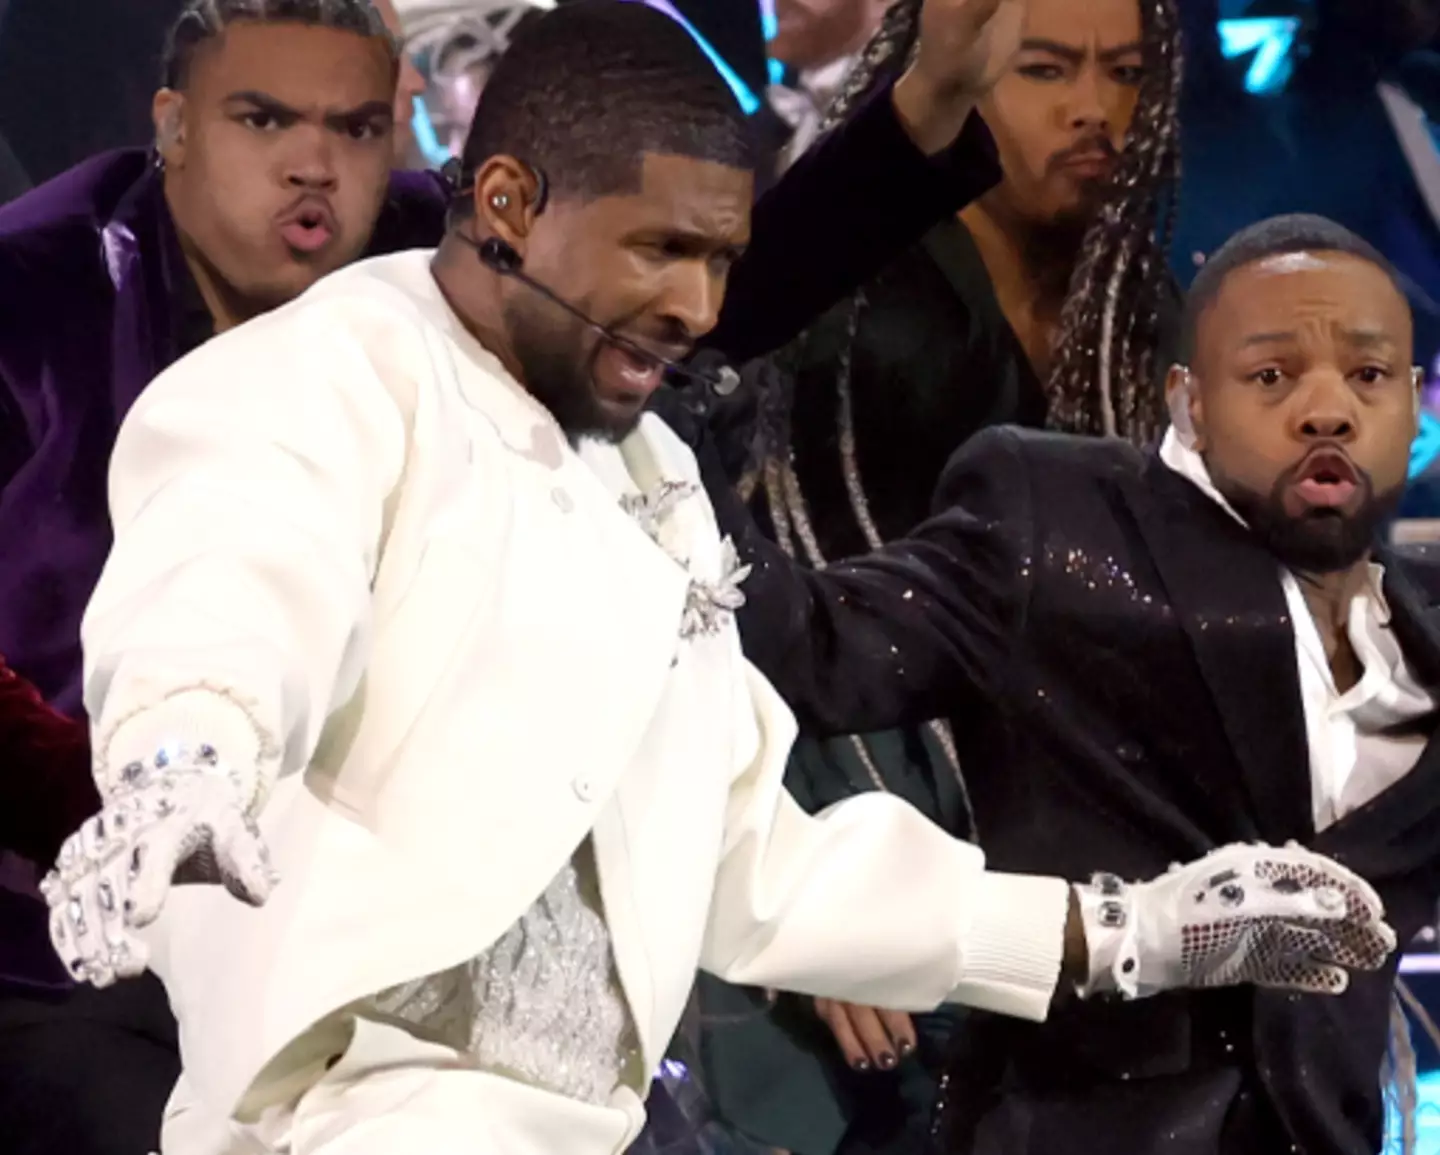 Usher has frequently been seen wearing gloves.